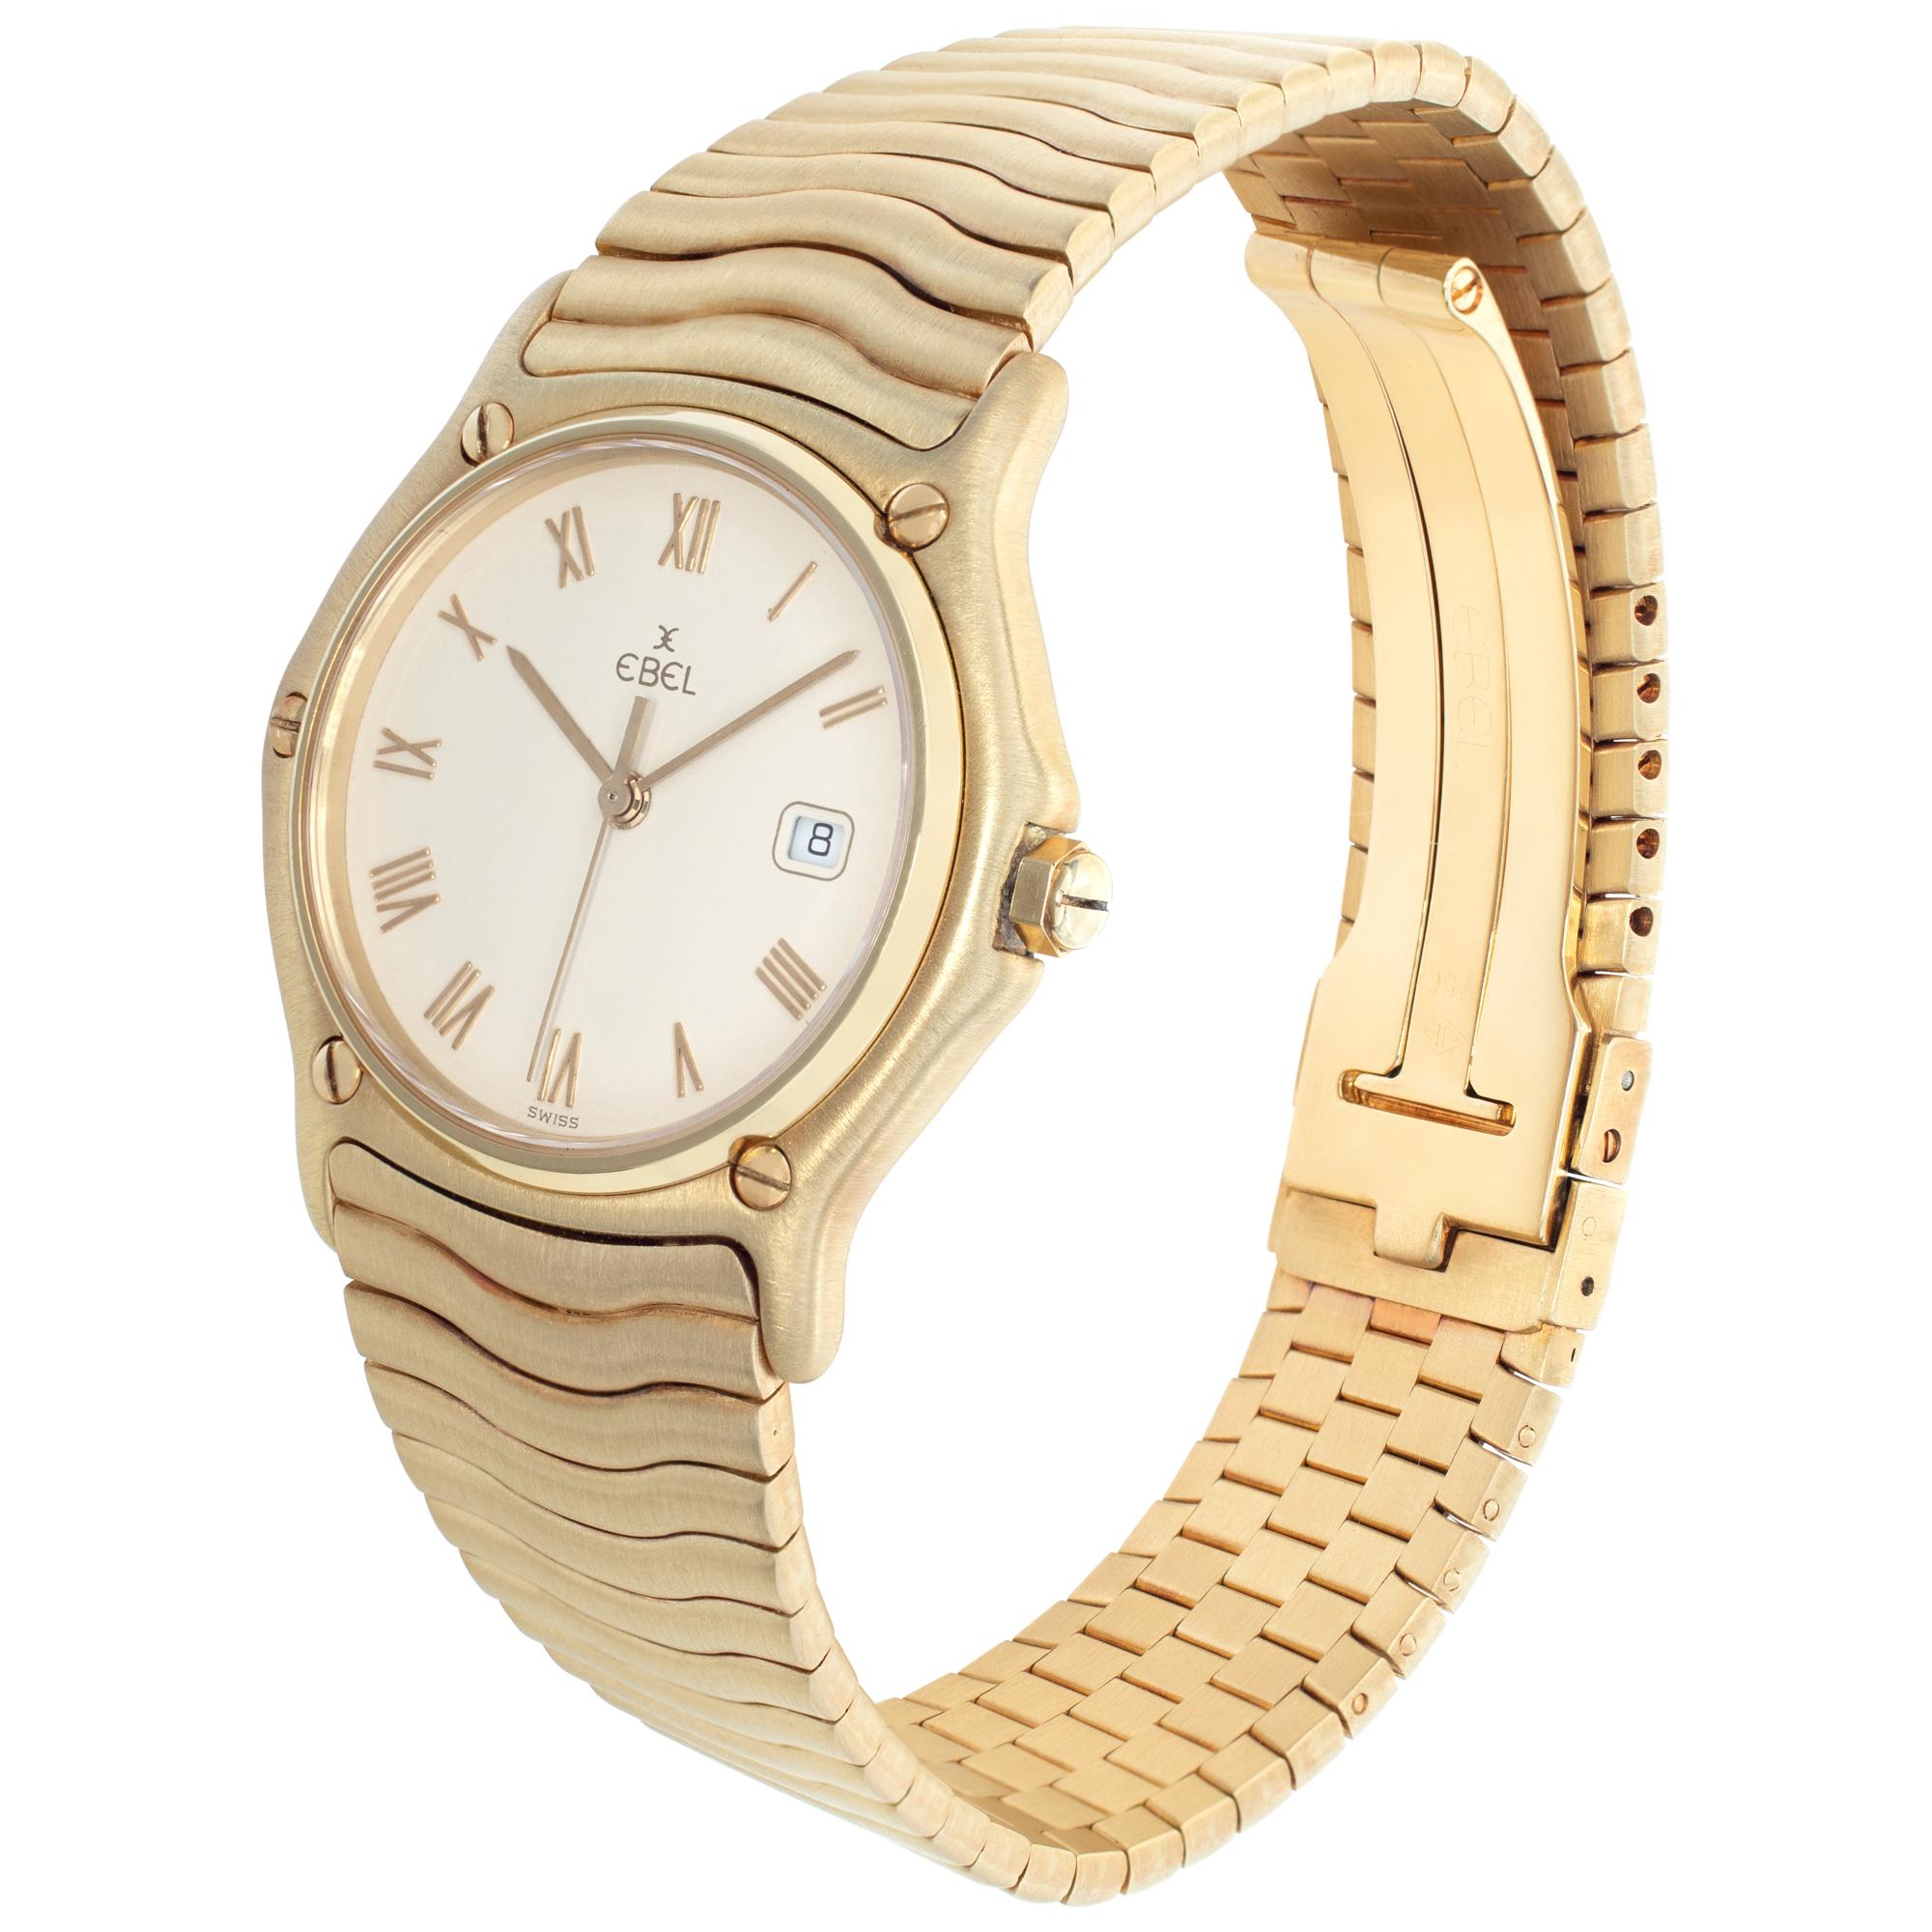 Ebel Sportwave in 18k yellow gold with cream dial set with yelow gold applied Roman numerals. Quartz w/ sweep seconds and date. 31 mm case size. Ref 883909. Fine Pre-owned Ebel Watch. Certified preowned Dress Ebel Sportwave 883909 watch is made out